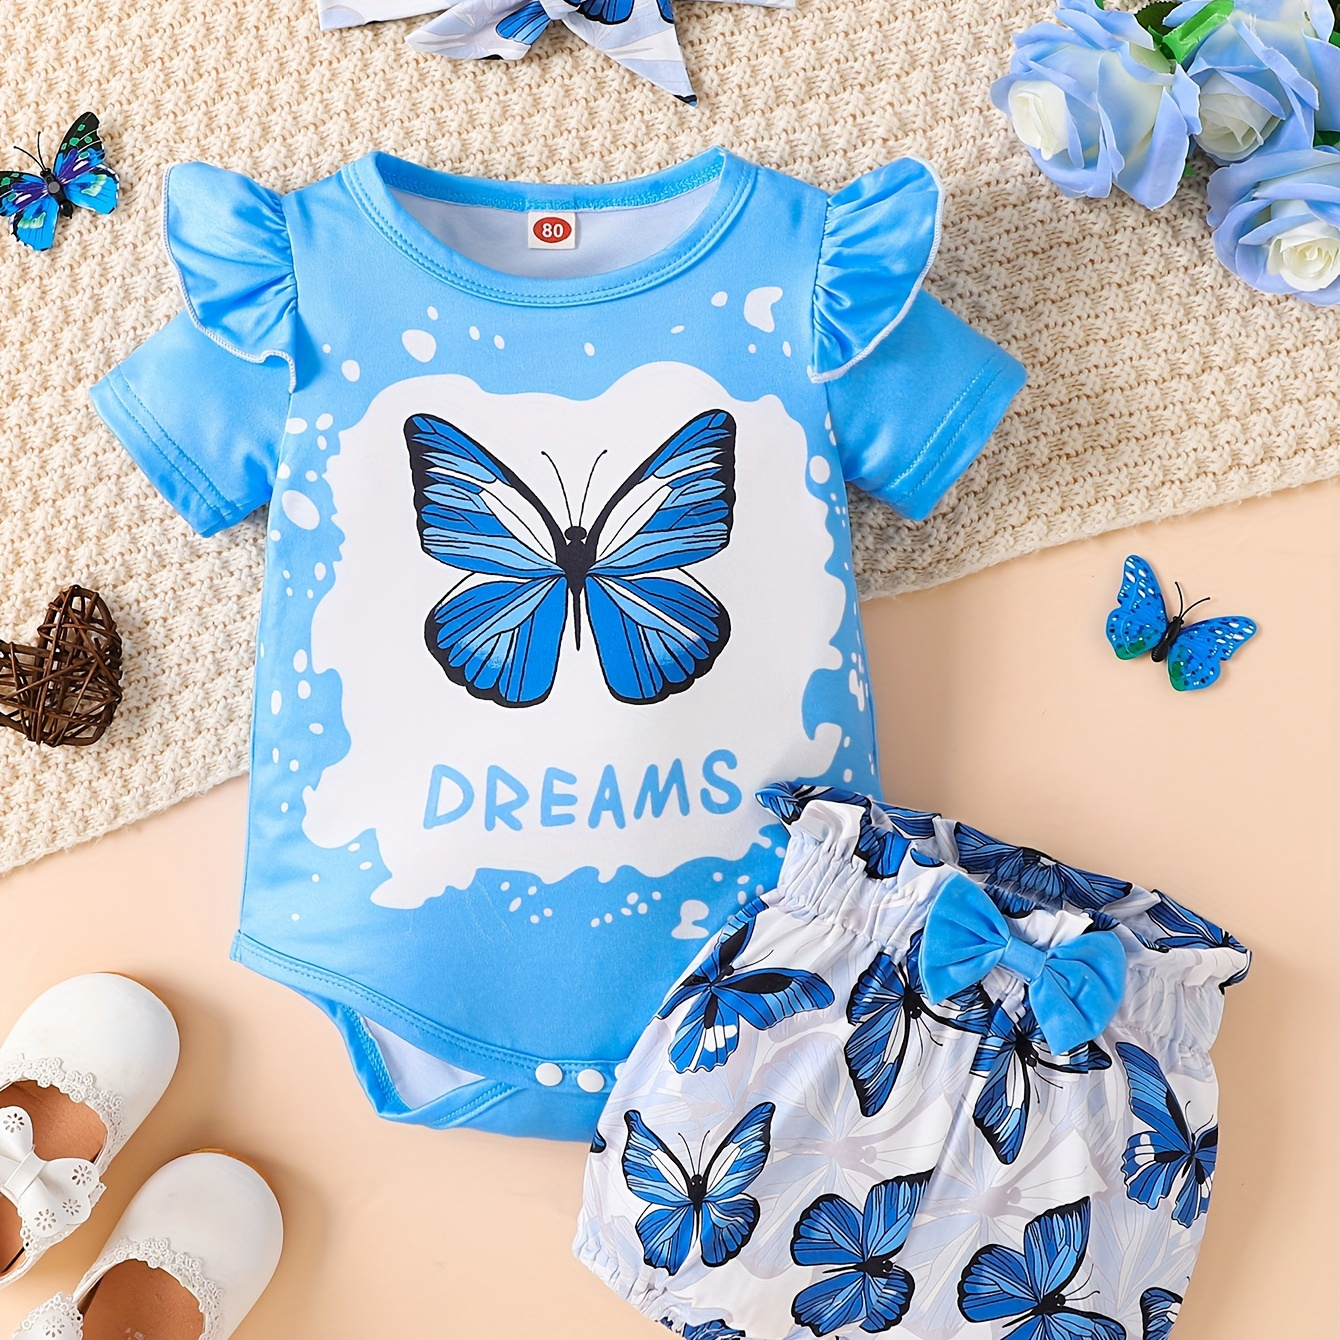 

Baby's Cartoon Butterfly & "dreams" Pattern 2pcs Summer Outfit, Triangle Bodysuit & Bowknot Headband & Casual Shorts Set, Toddler & Infant Girl's Clothes For Daily/holiday, As Gift